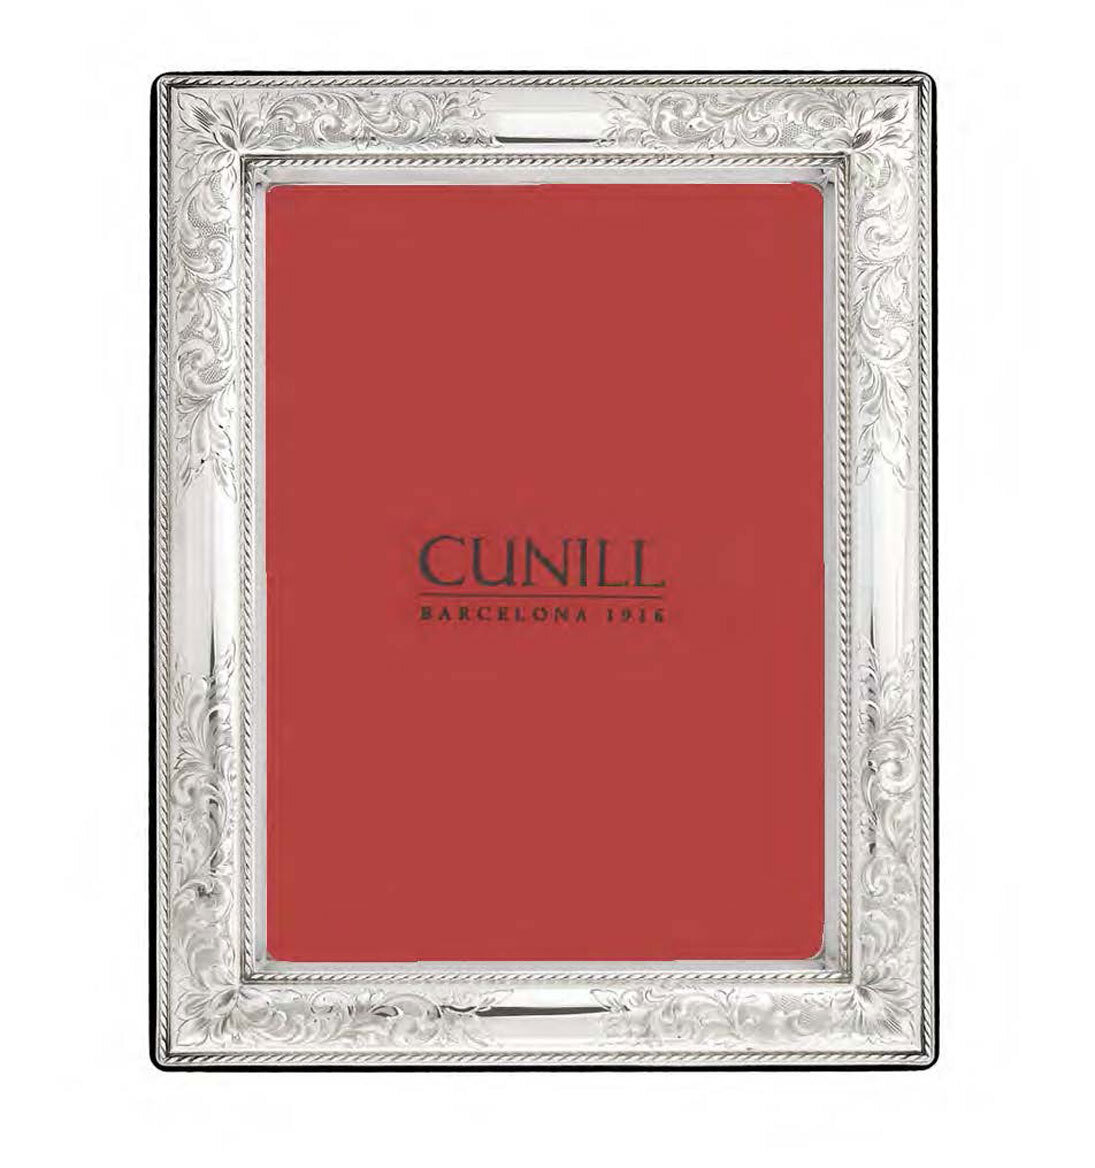 Cunill Vintage 2 x 3 Inch Picture Frame - Sterling Silver